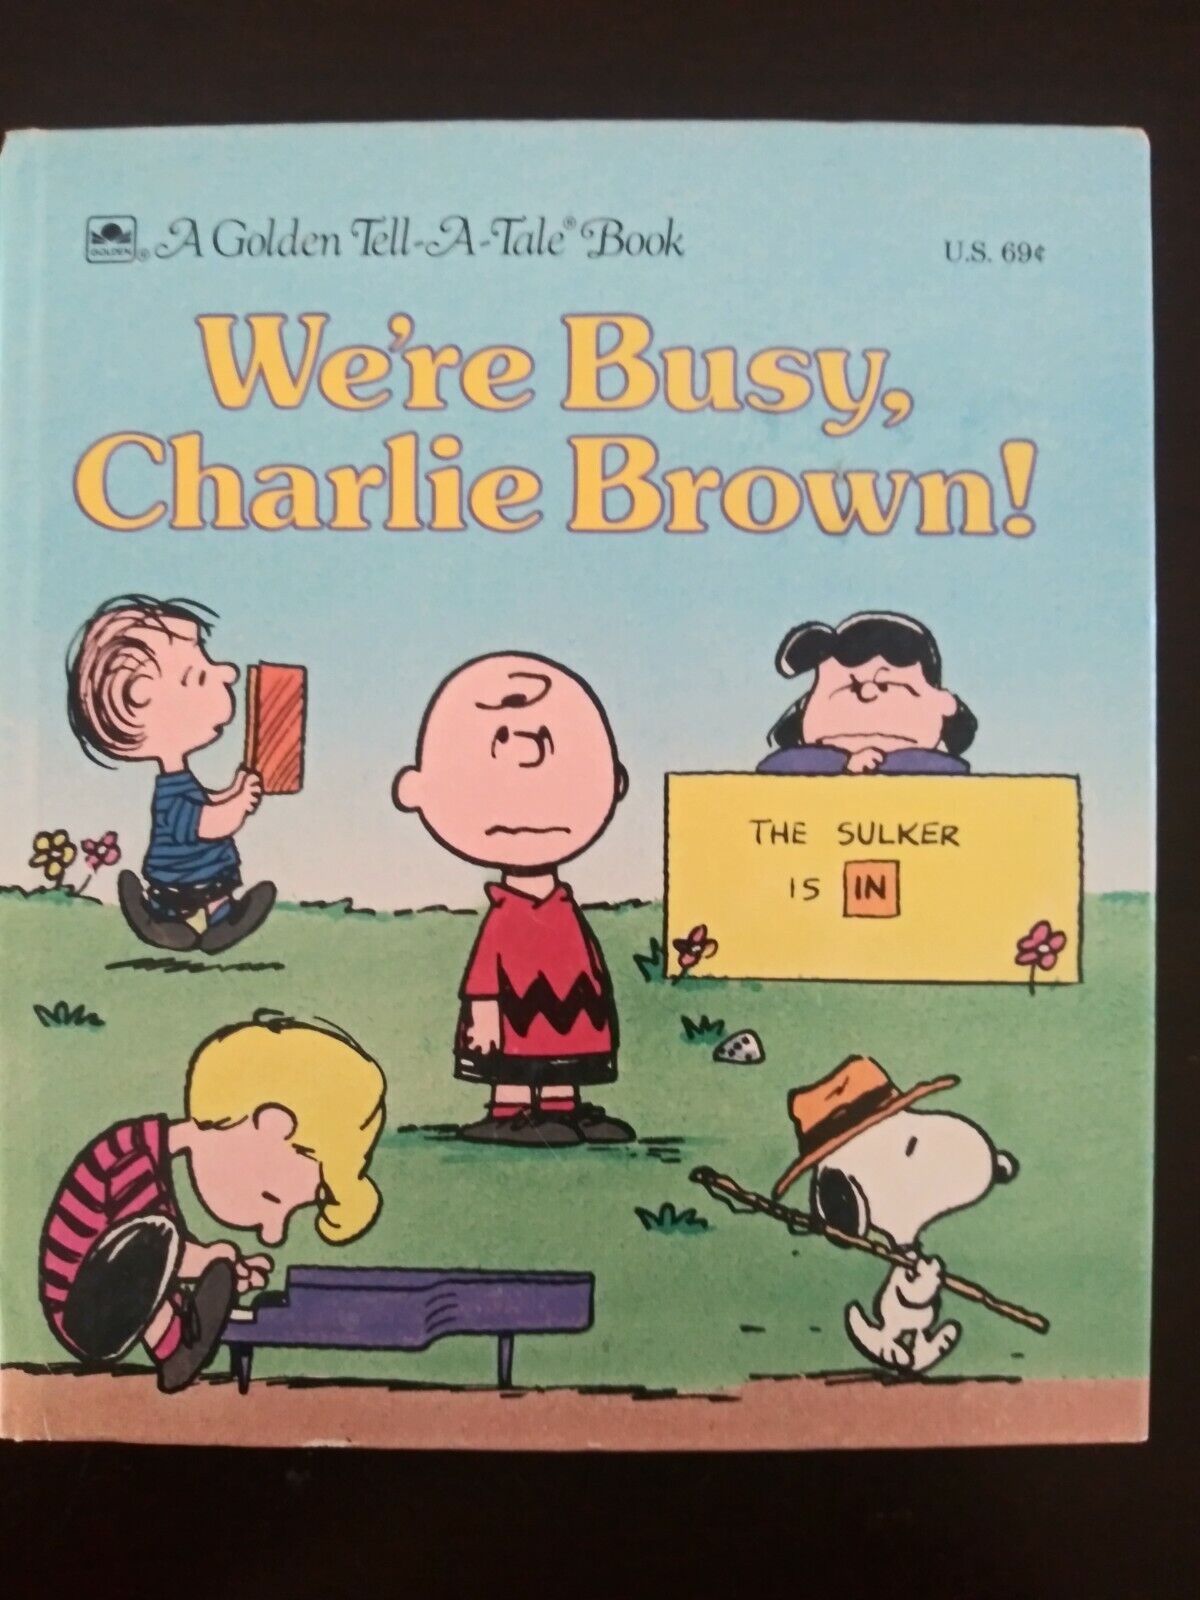 We’re Busy, Charlie Brown VINTAGE Golden Tell-A-Tale Book 1988 